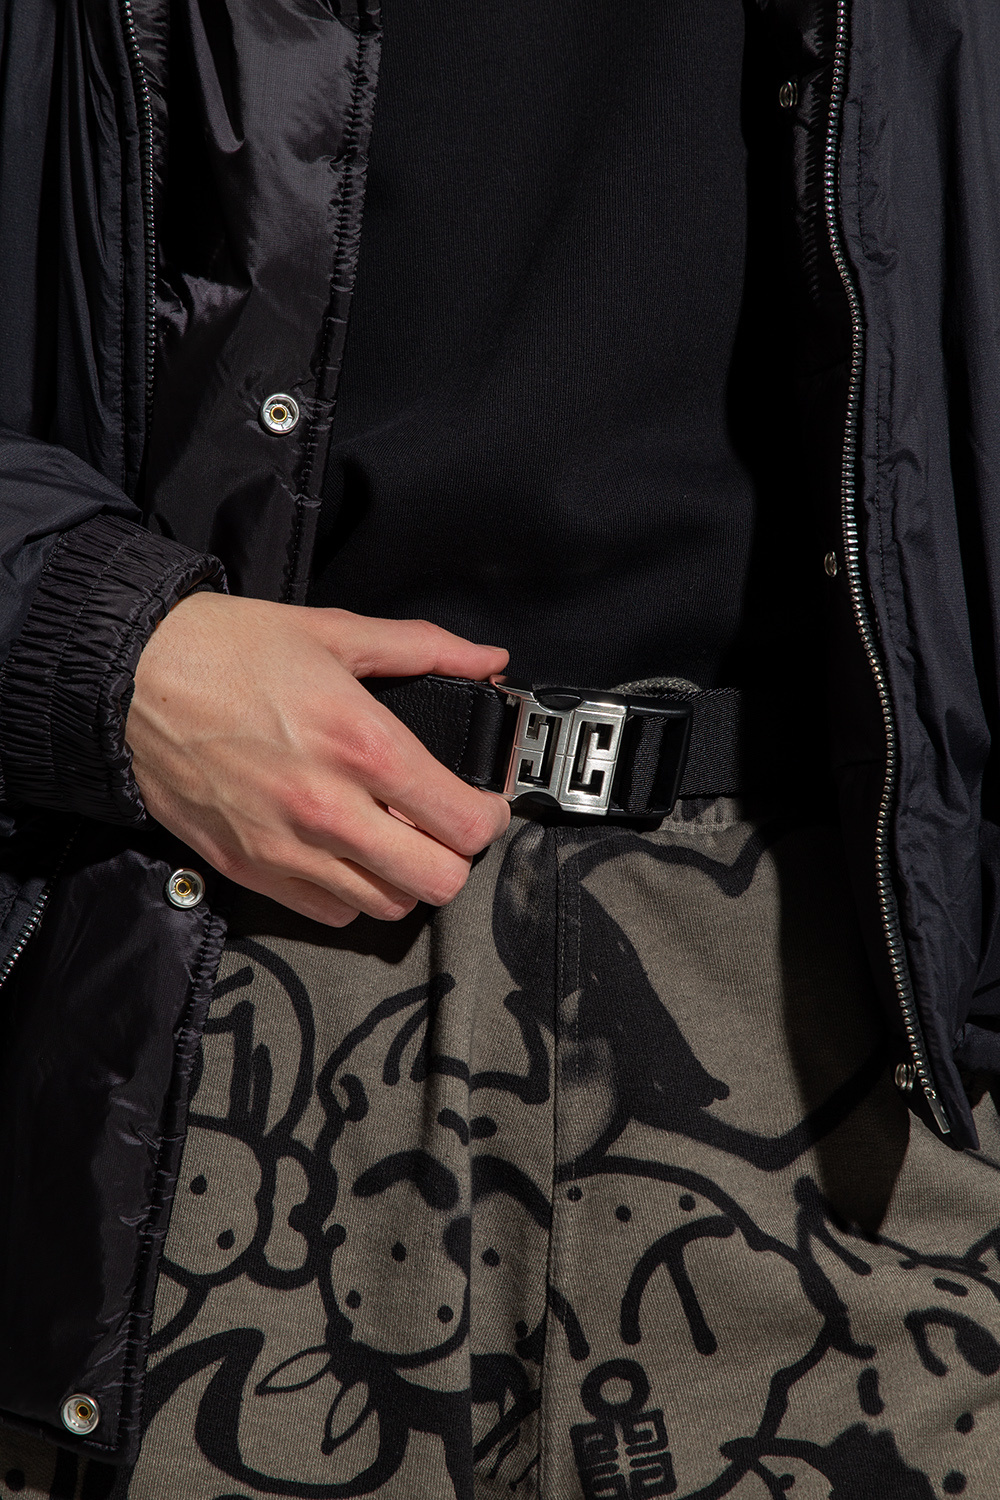 Givenchy Belt with logo